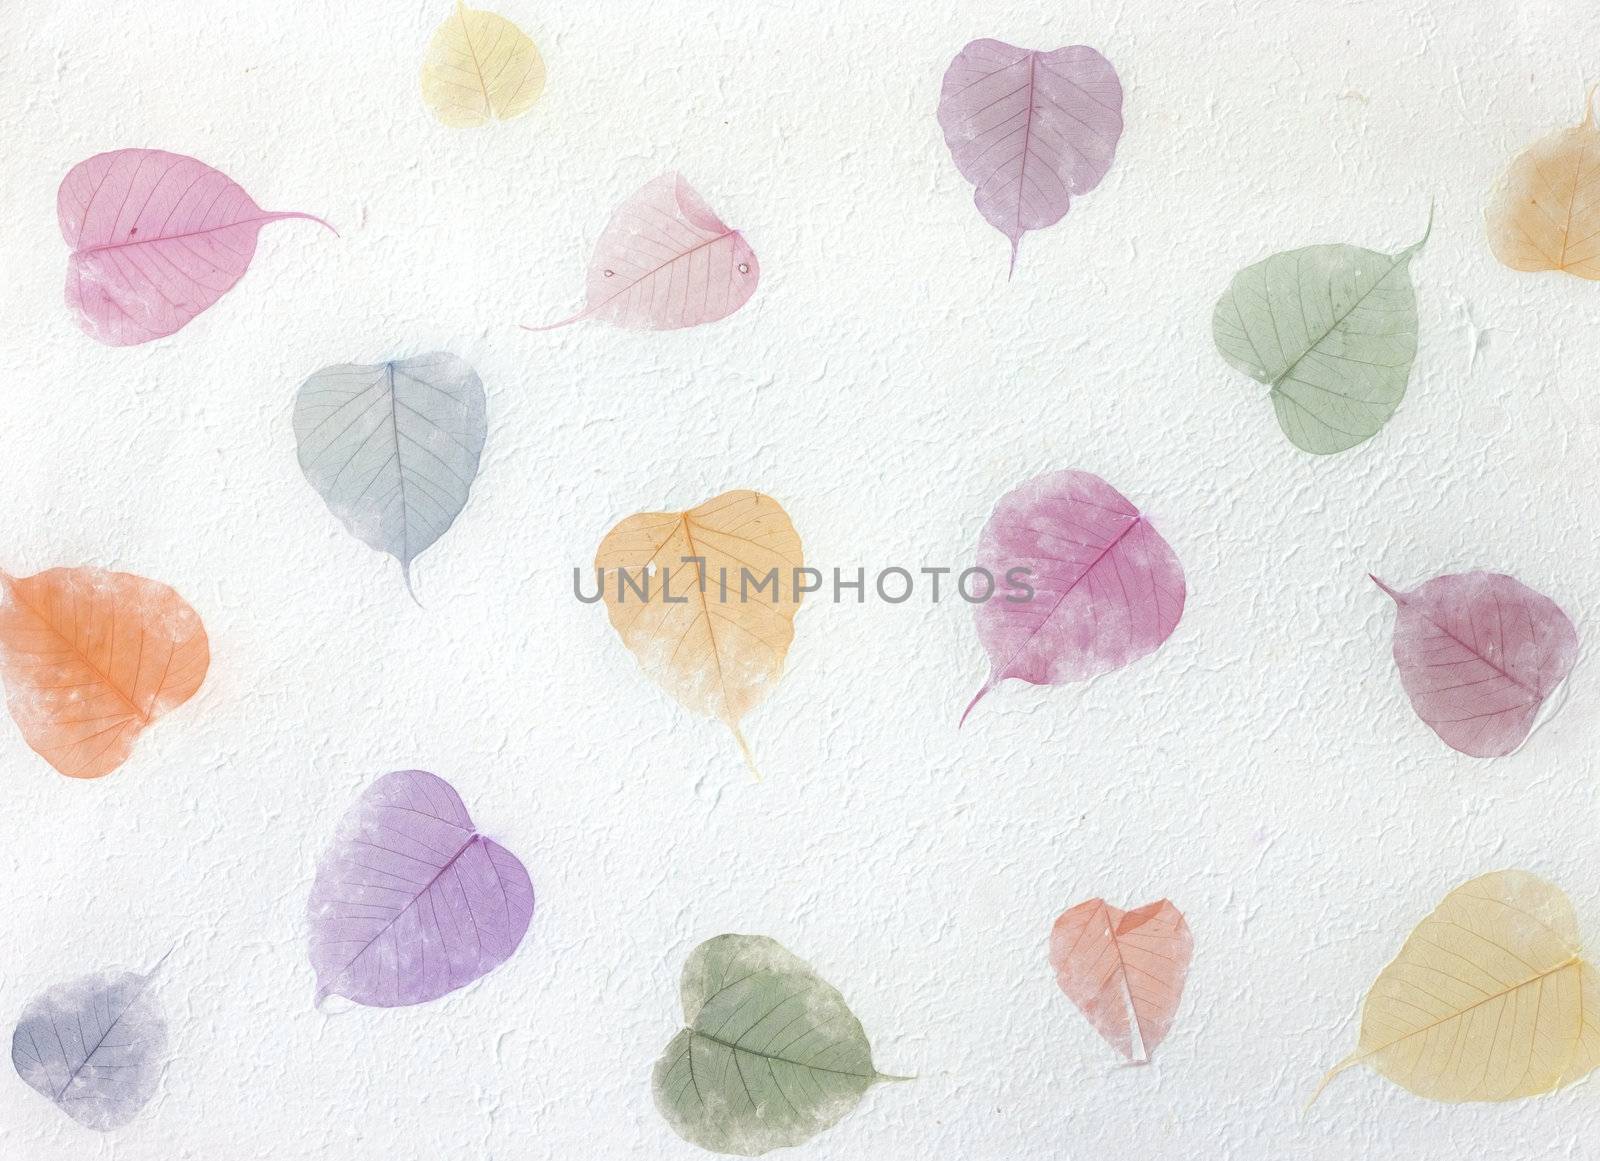 White Mulberry paper with tree leaves background.